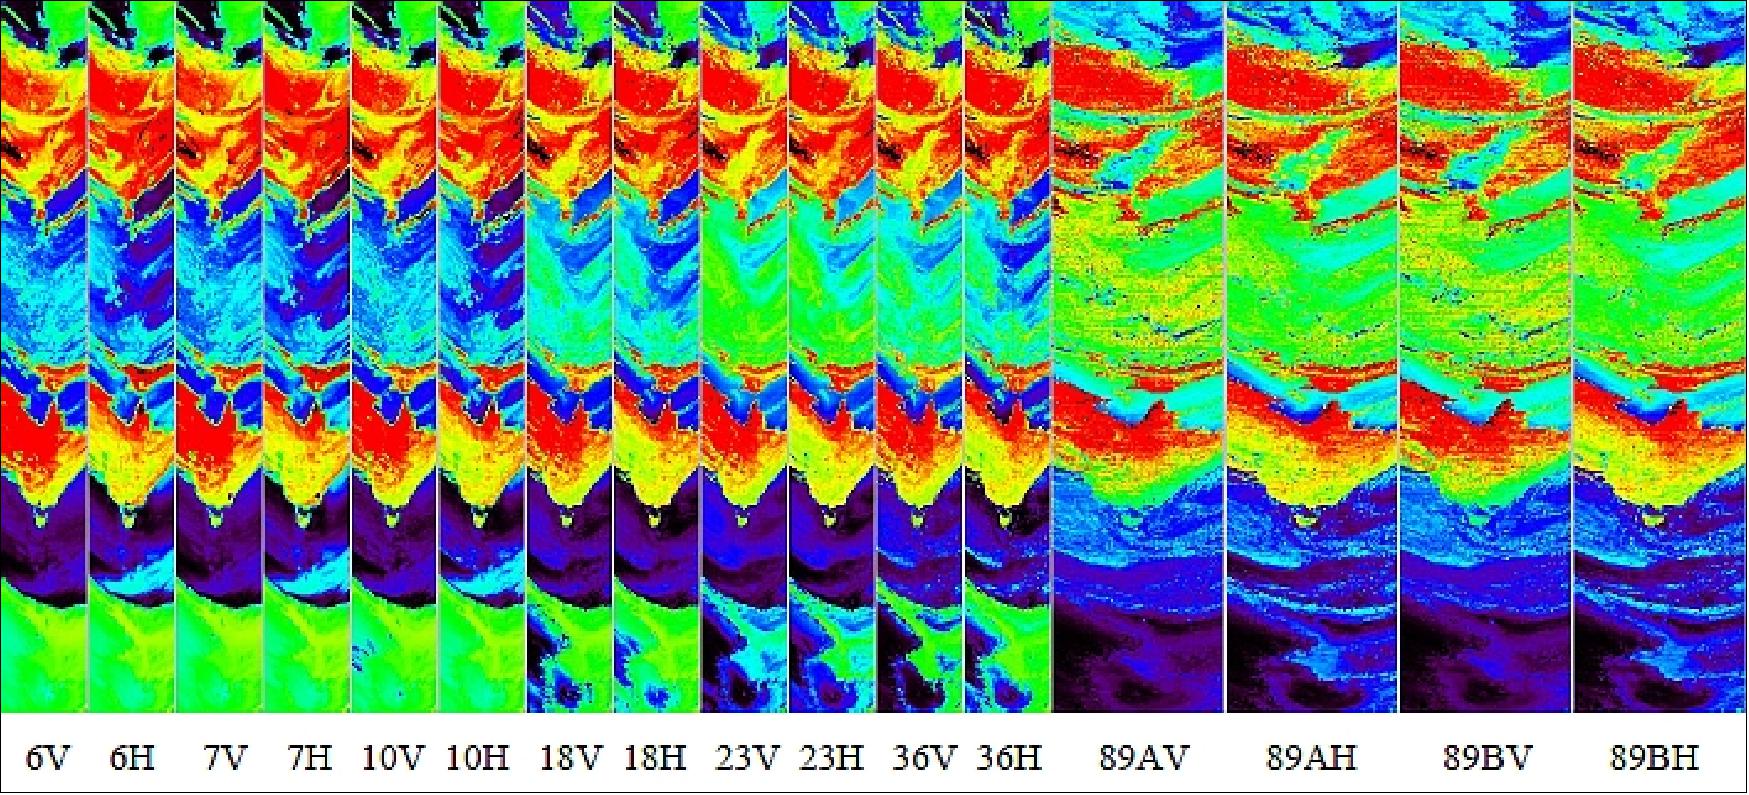 Figure 21: Image of AMSR2 Level-1B products showing brightness temperature at vertical and horizontal polarization of each frequency bands of one scene on July 22, 2012 (image credit: JAXA, Ref. 58)